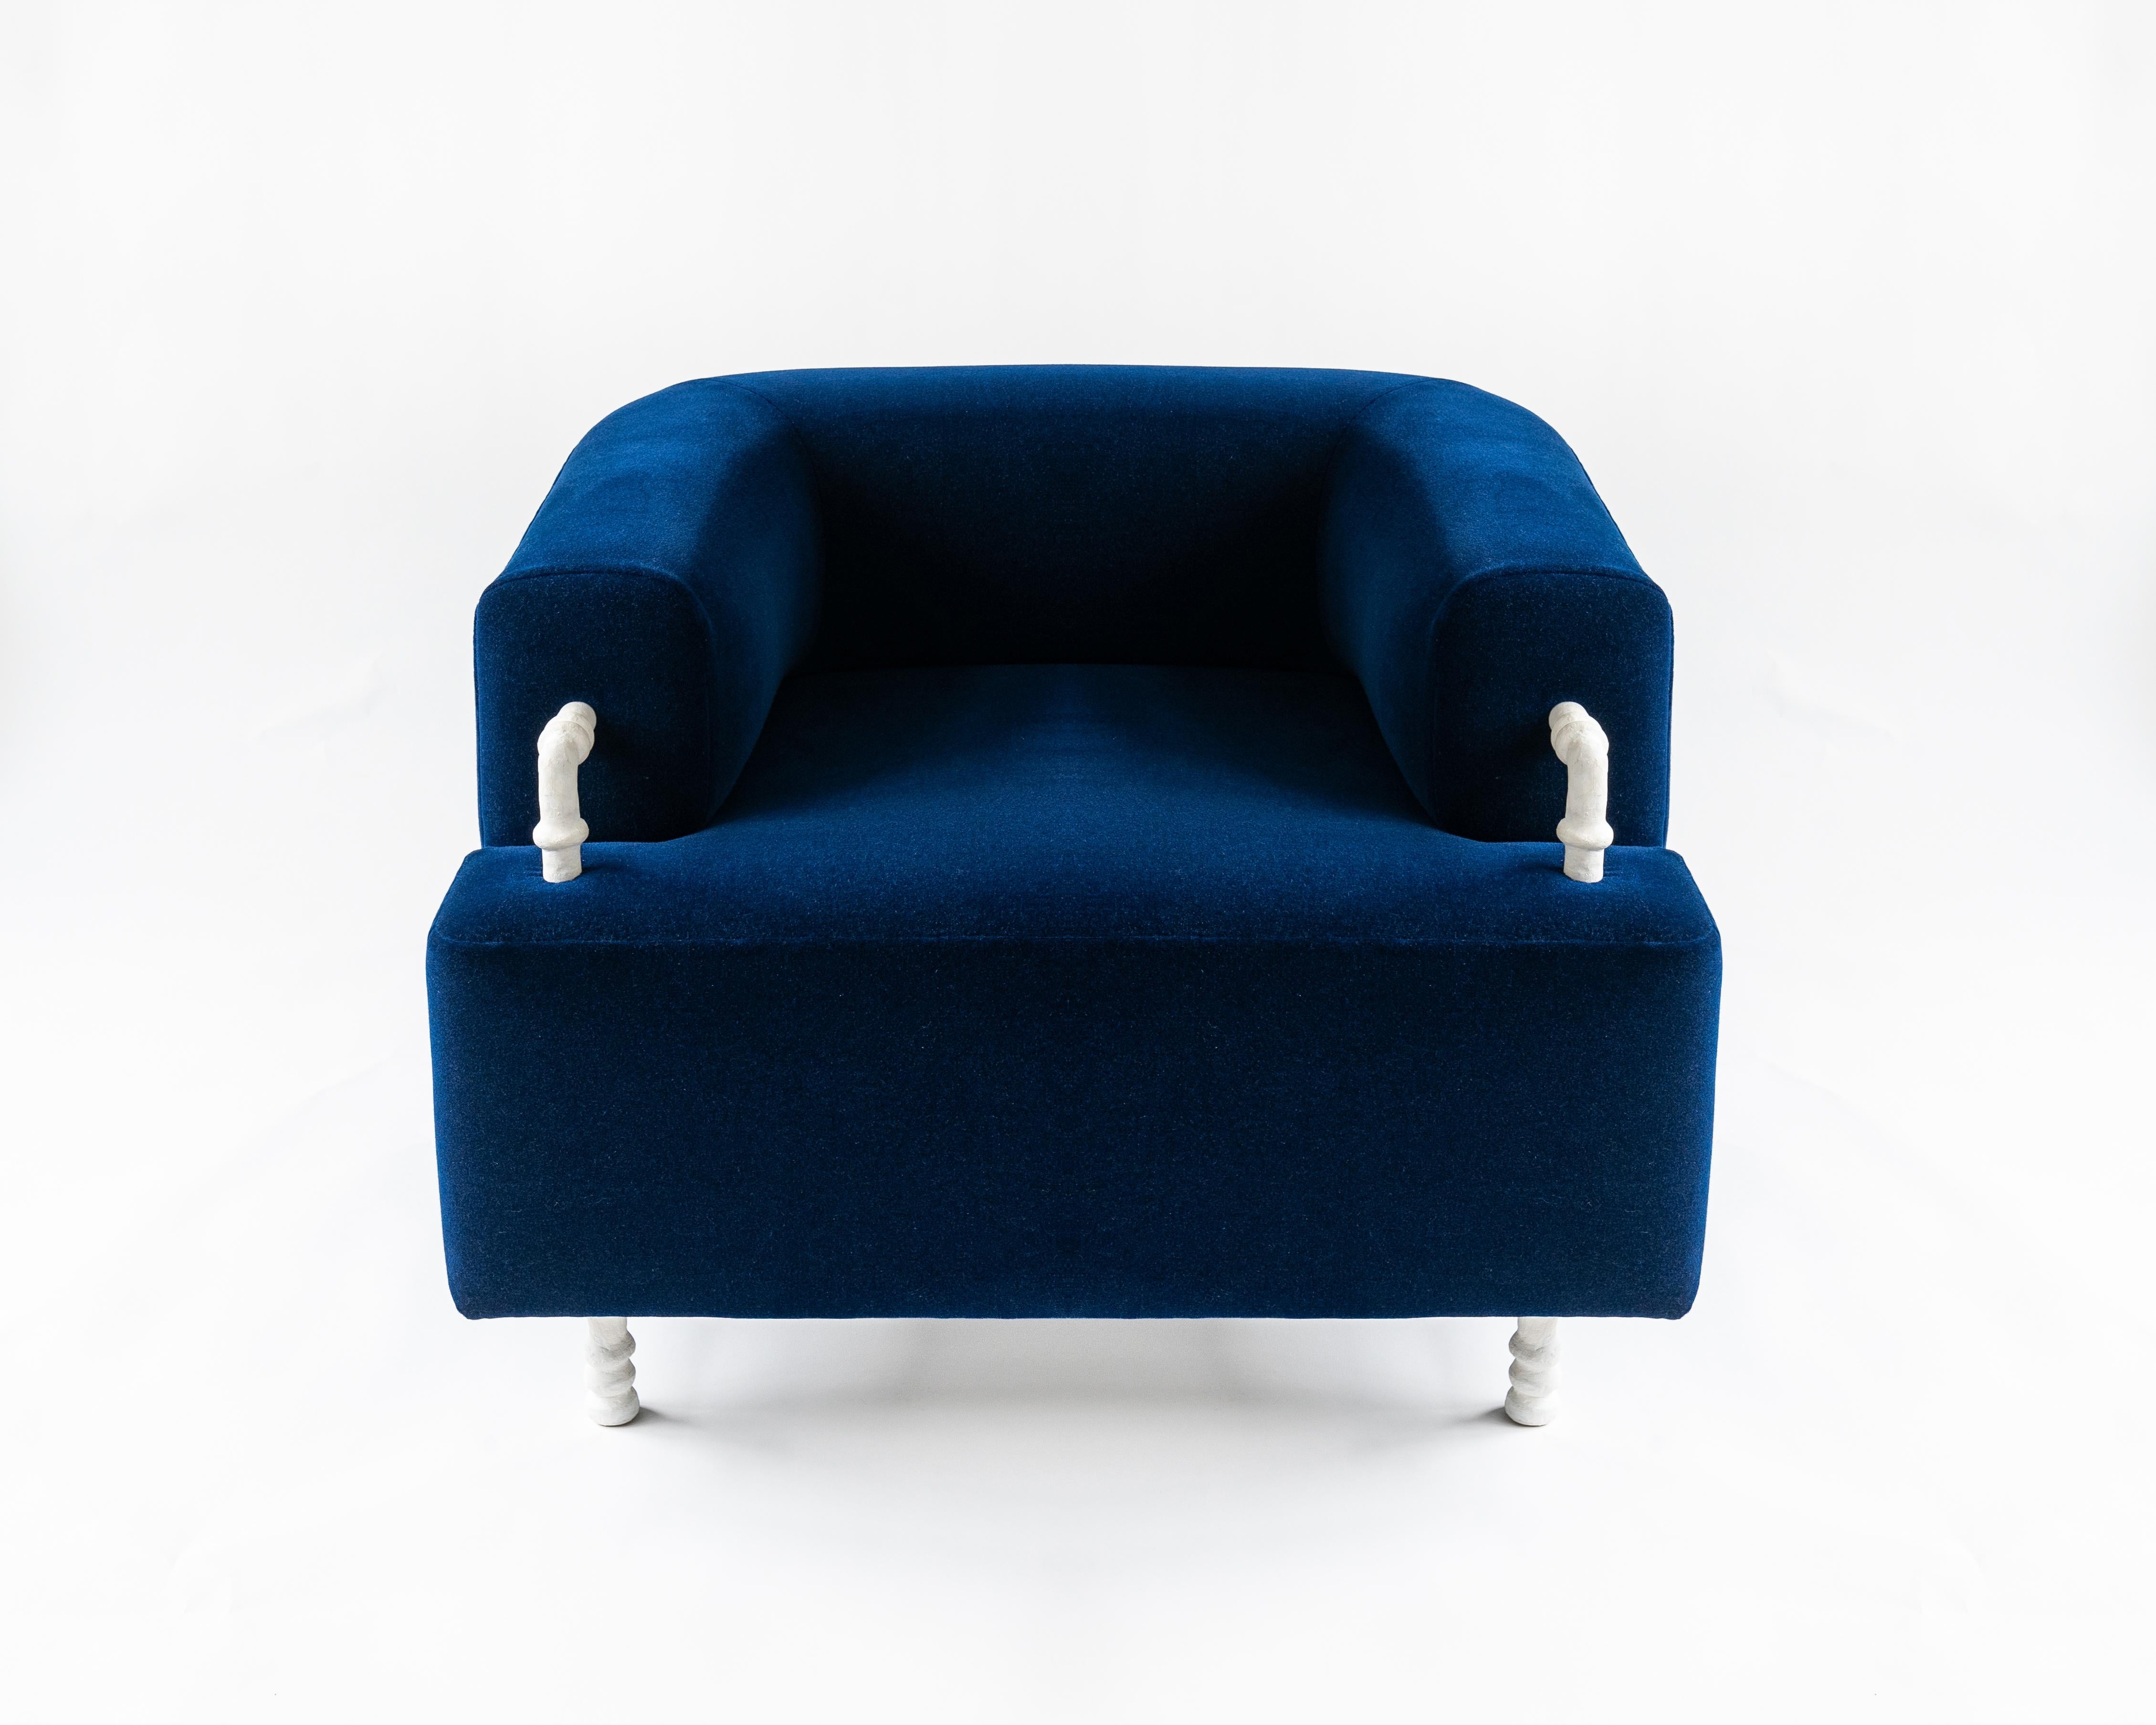 ***INSTOCK FLOOR MODEL***
ARMCHAIR NO. 2 - Pair
Materials: Knoll Mohair Plush Textile, Hand carved steel in plaster
J.M. Szymanski
d. 2020

Our signature hand carved steel elements add an edge to the softness of the mohair fabric. Available in